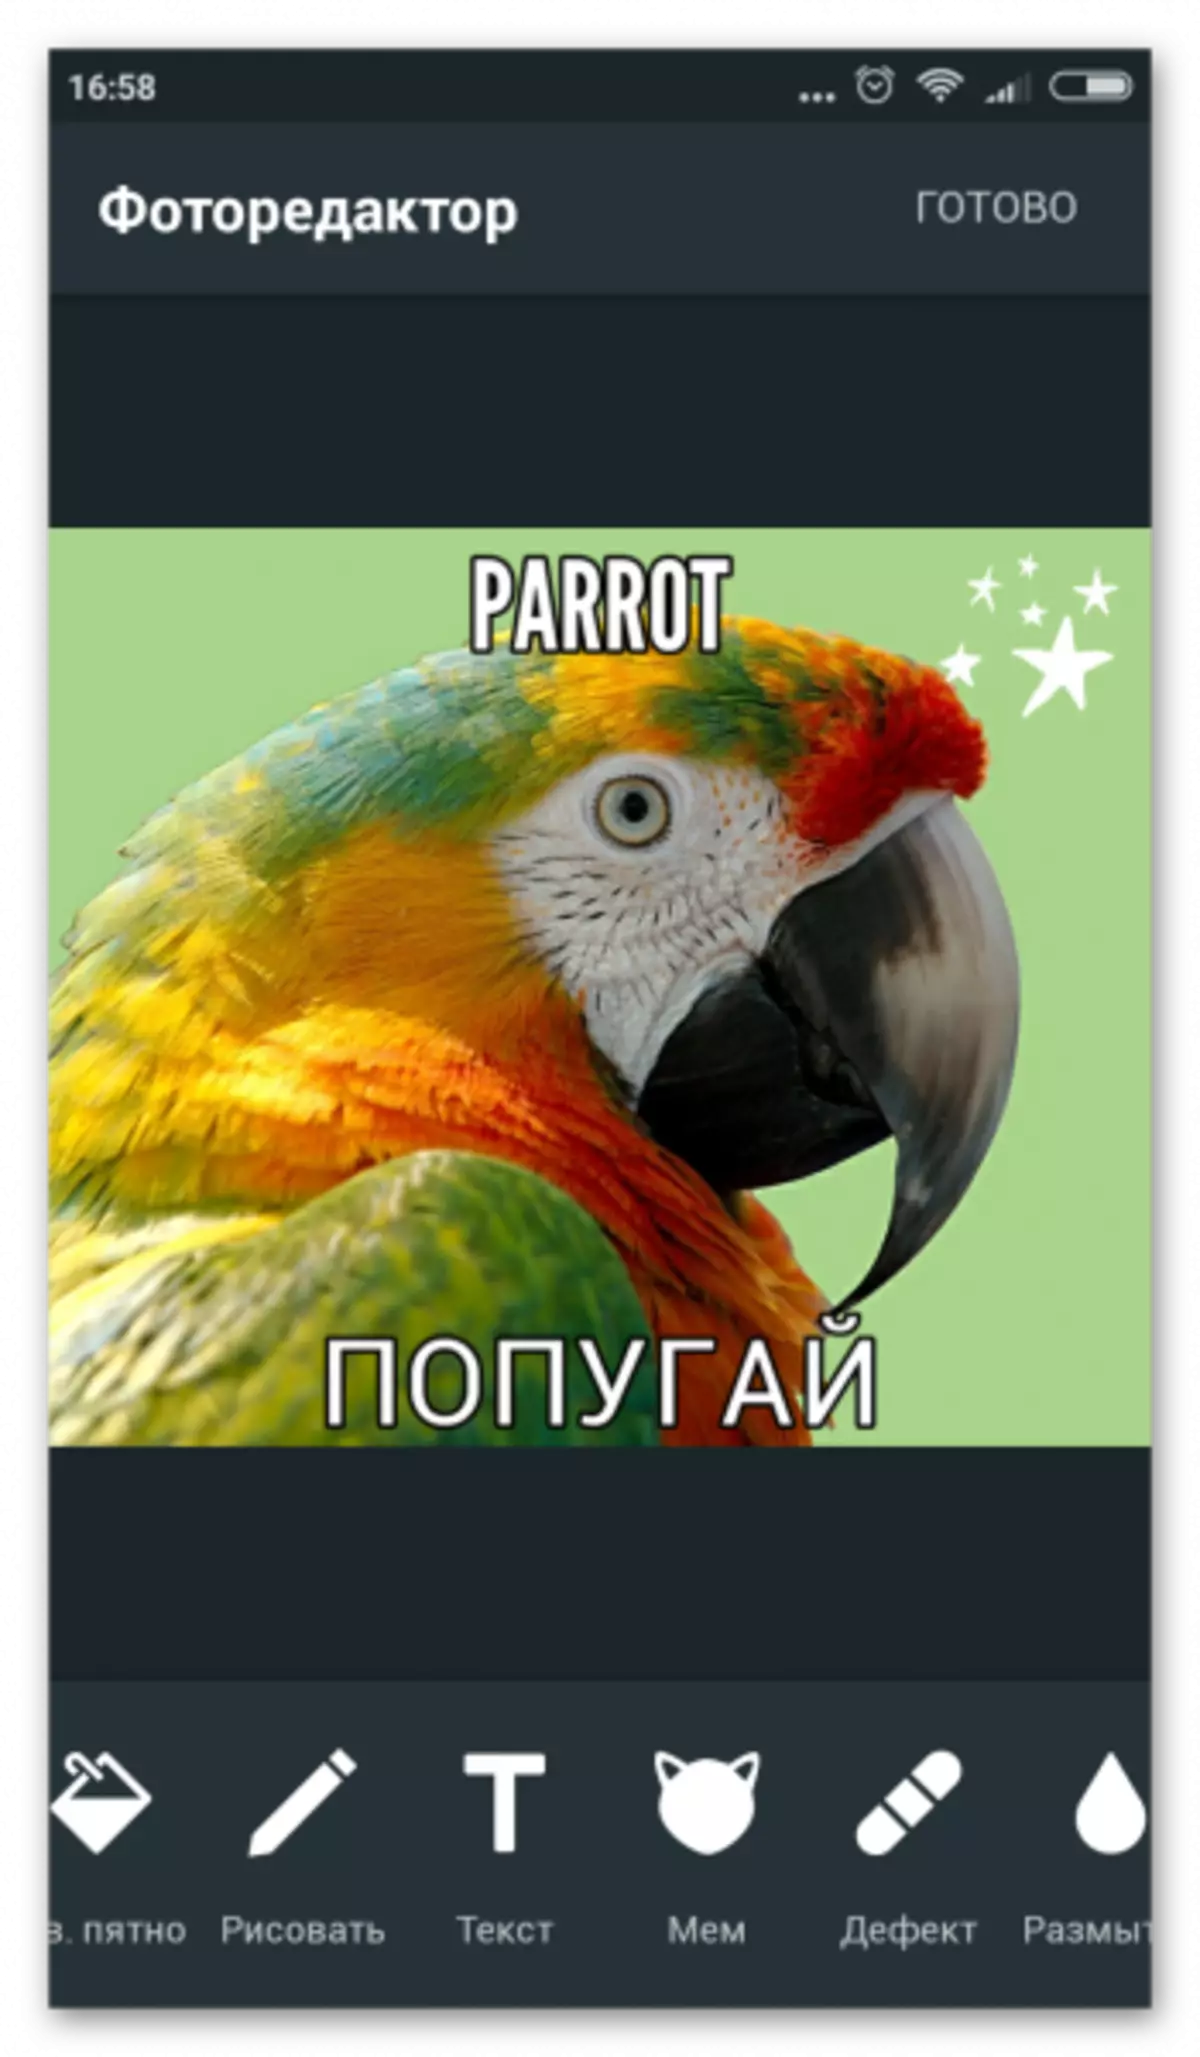 Aviary on Android